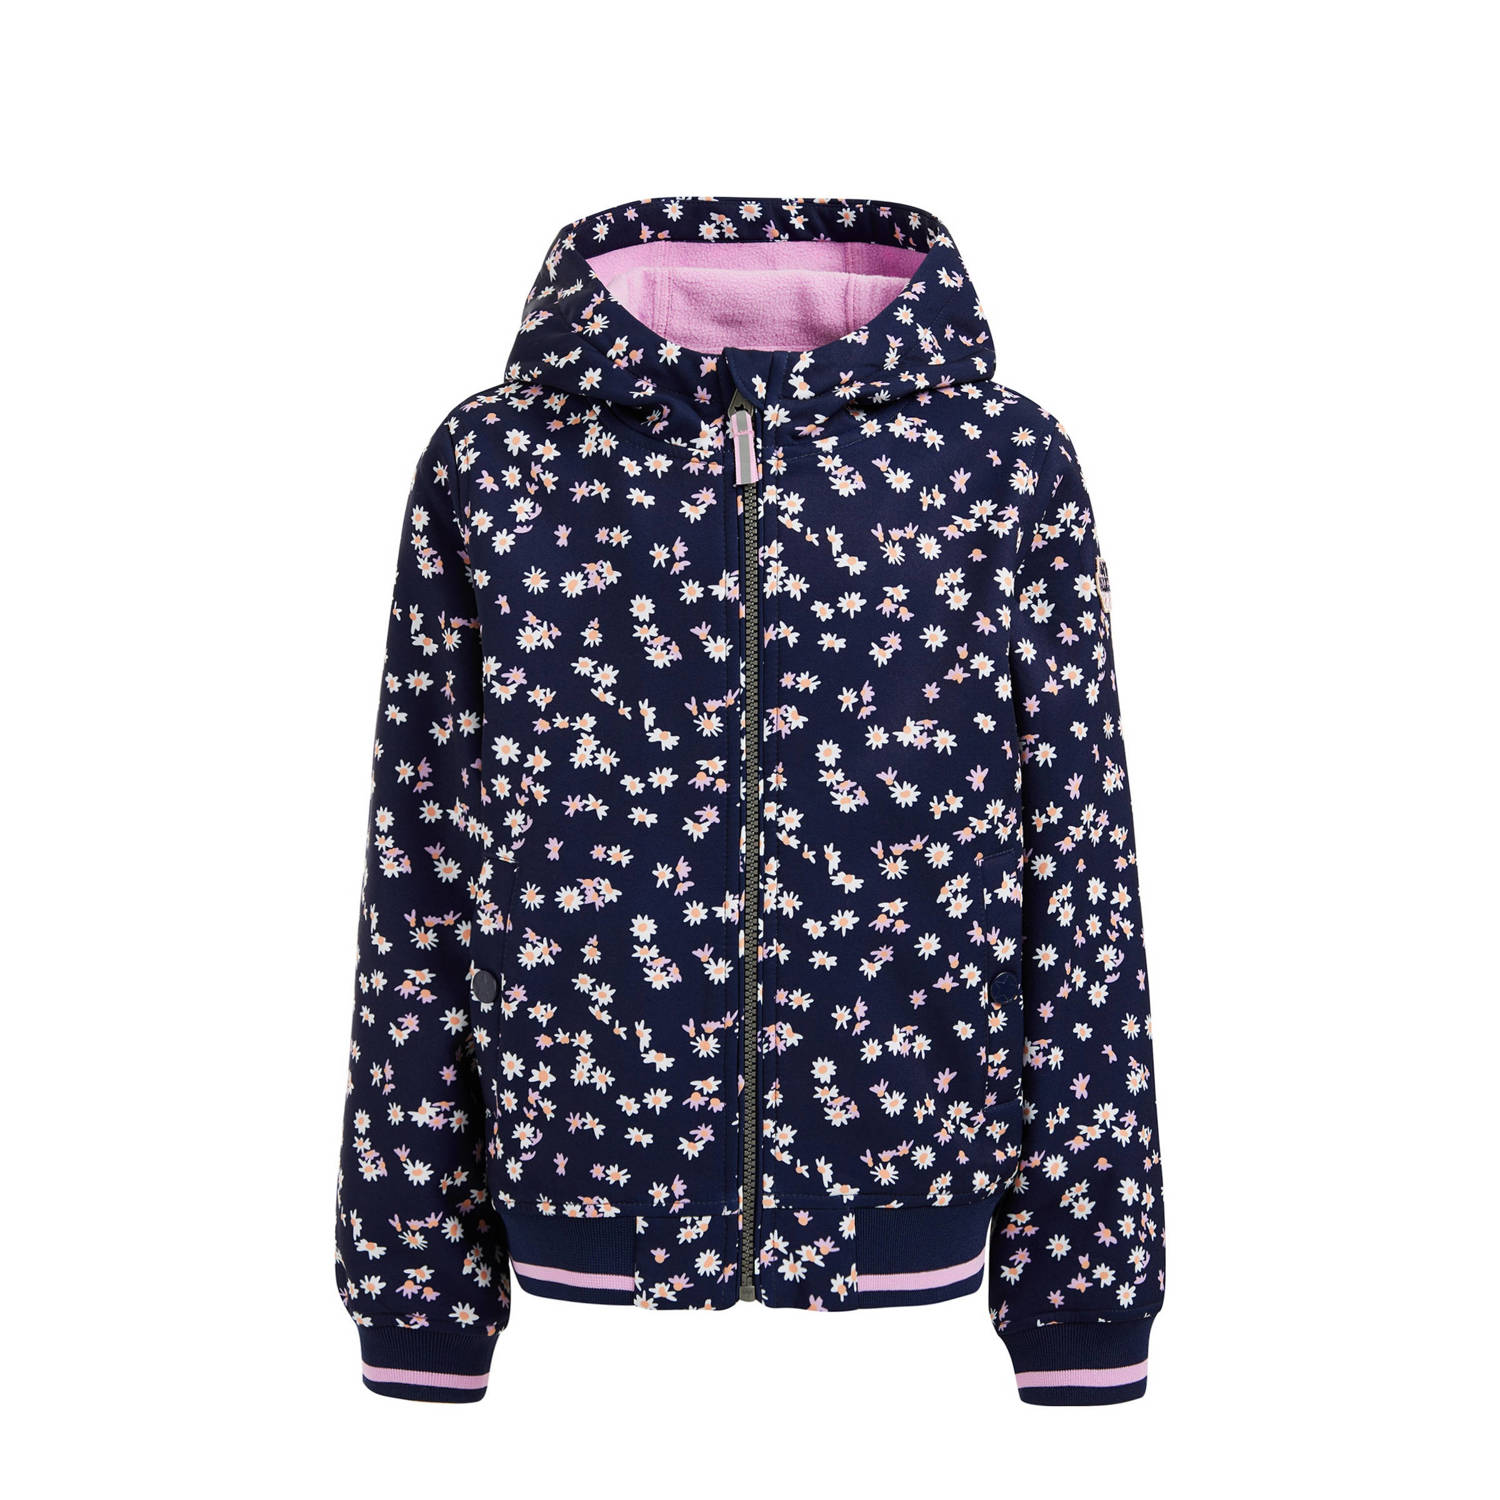 WE Fashion softshell jas met all over print donkerblauw Meisjes Polyester Capuchon 110 116